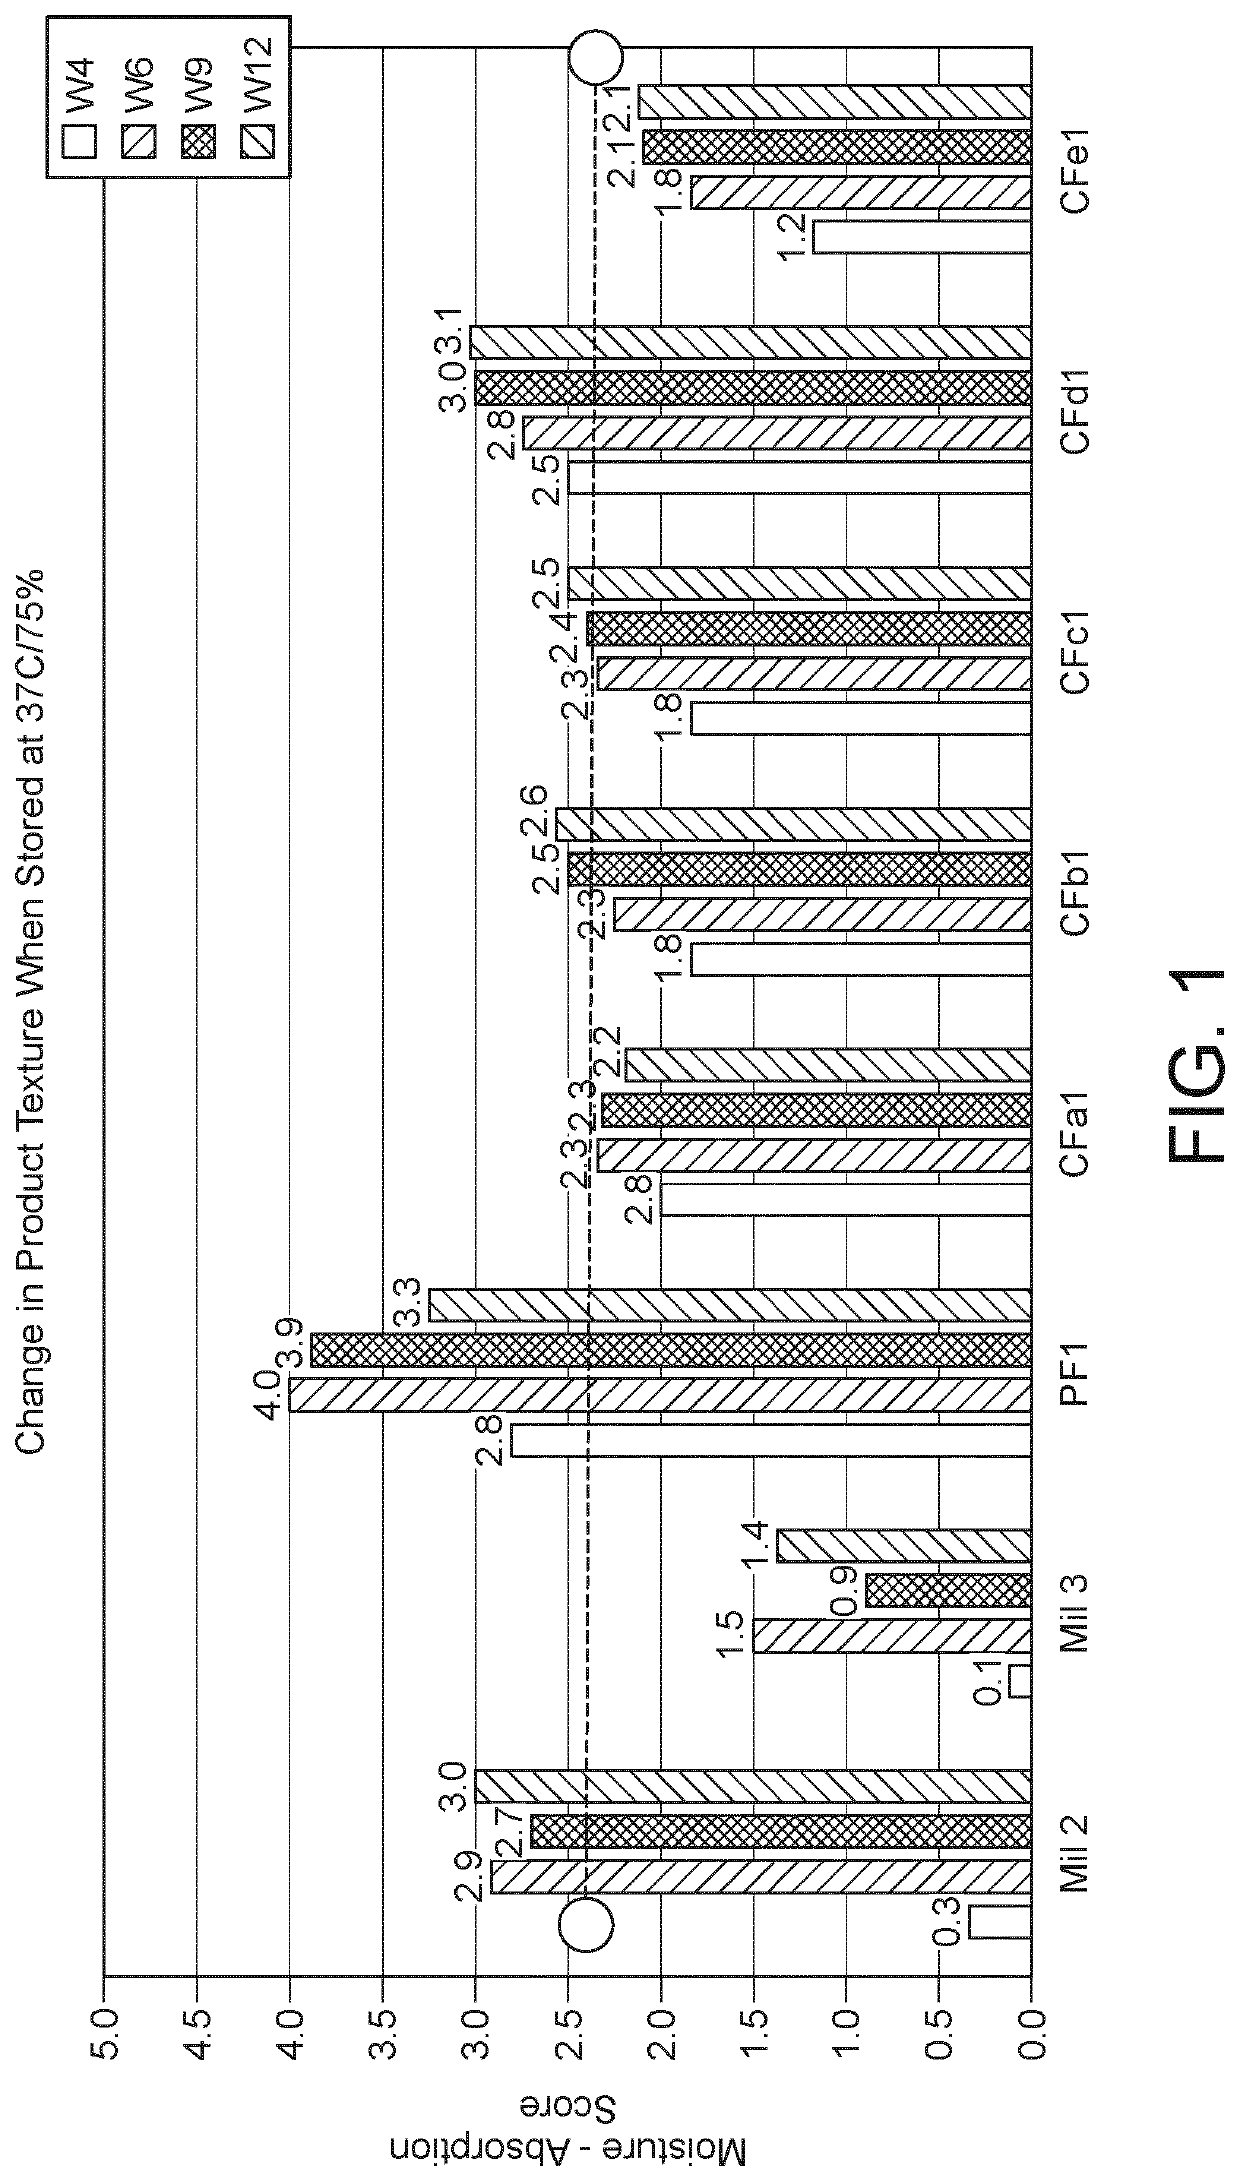 Syrup binder system for preparing food, and preparation process and use thereof